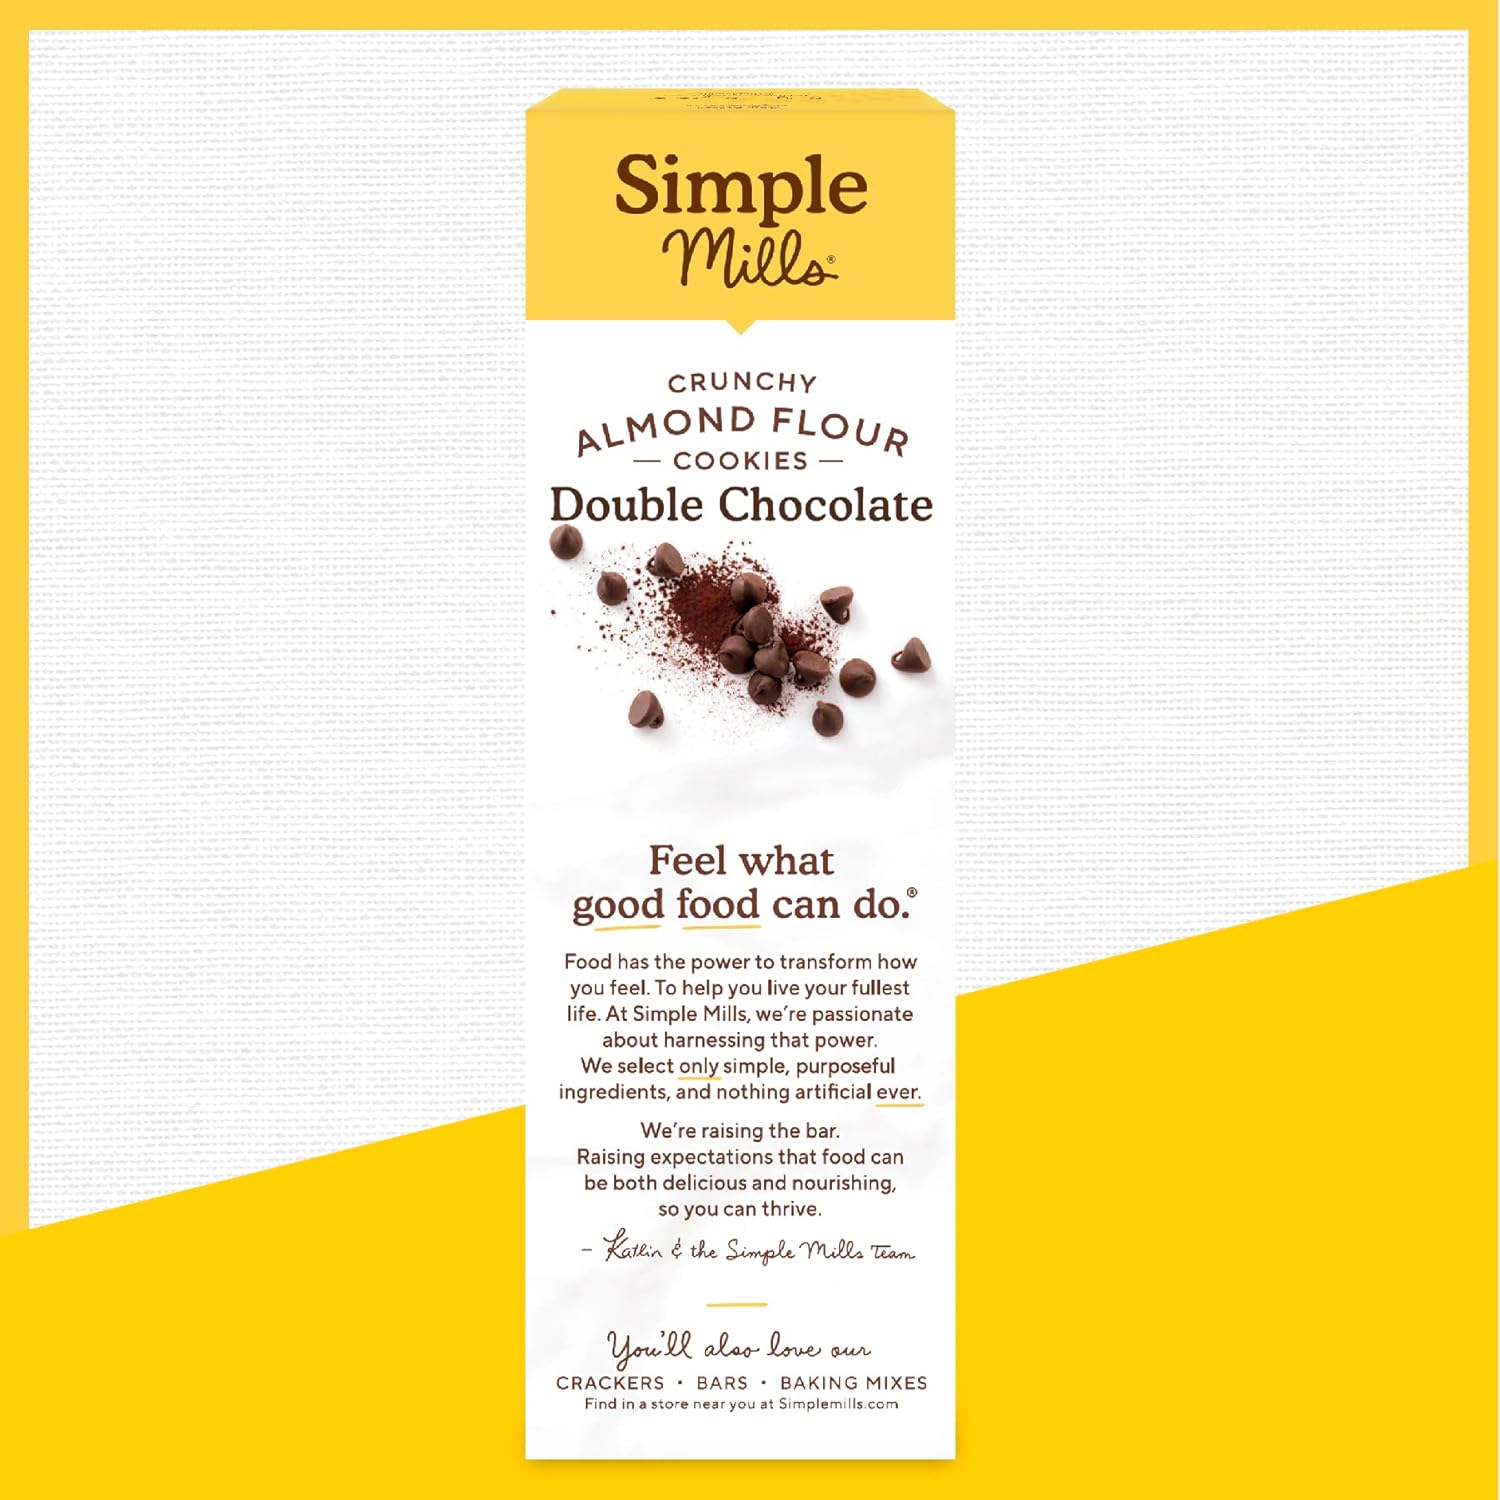 Simple Mills Almond Flour Crunchy Cookies, Double Chocolate Chip - Gluten Free, Vegan, Healthy Snacks, Made with Organic Coconut Oil, 5.5 Ounce (Pack of 6) : Grocery & Gourmet Food